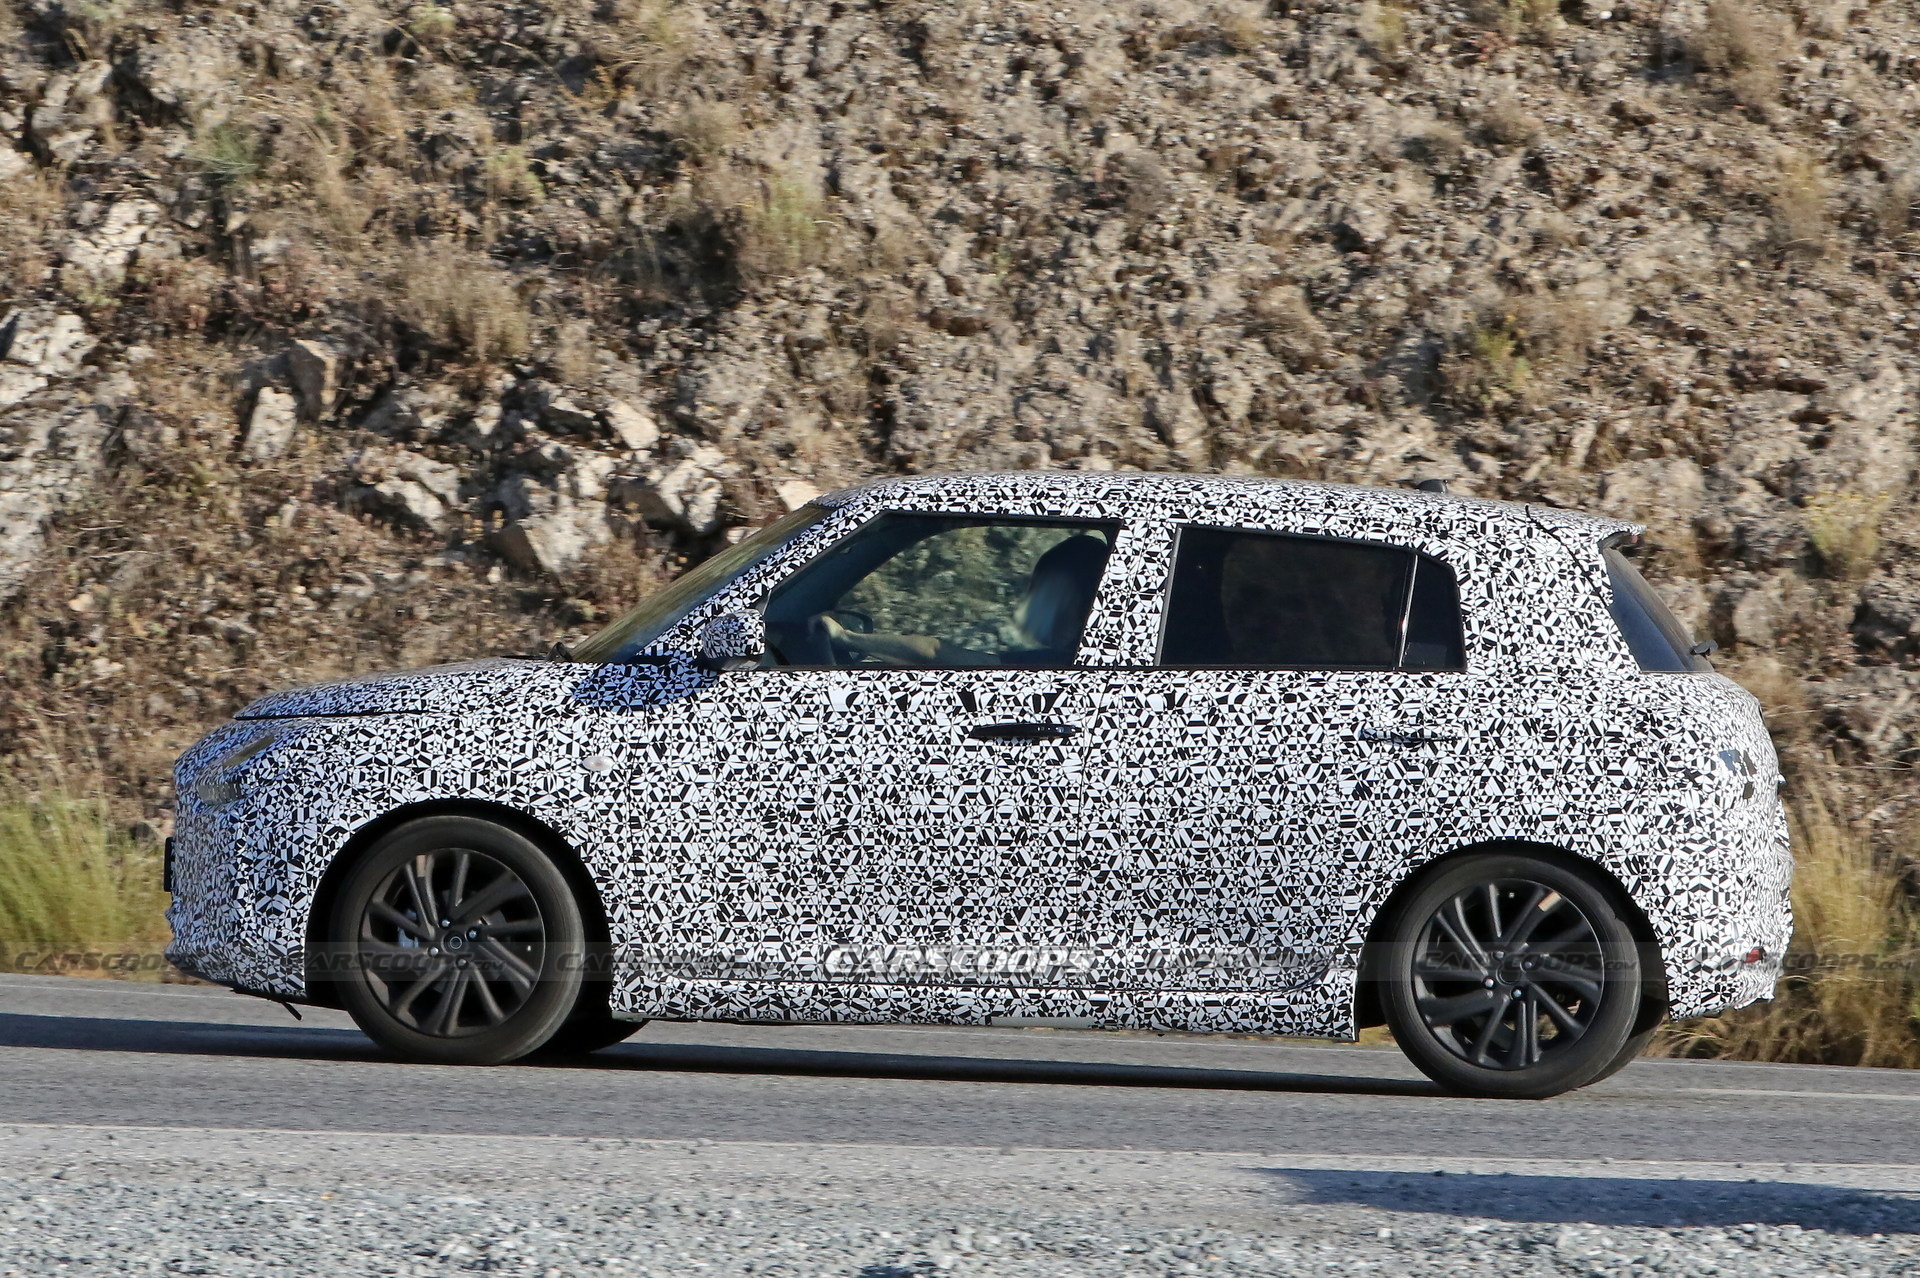 Here's What Next Suzuki Swift Could Look Like Based On Spy Shots